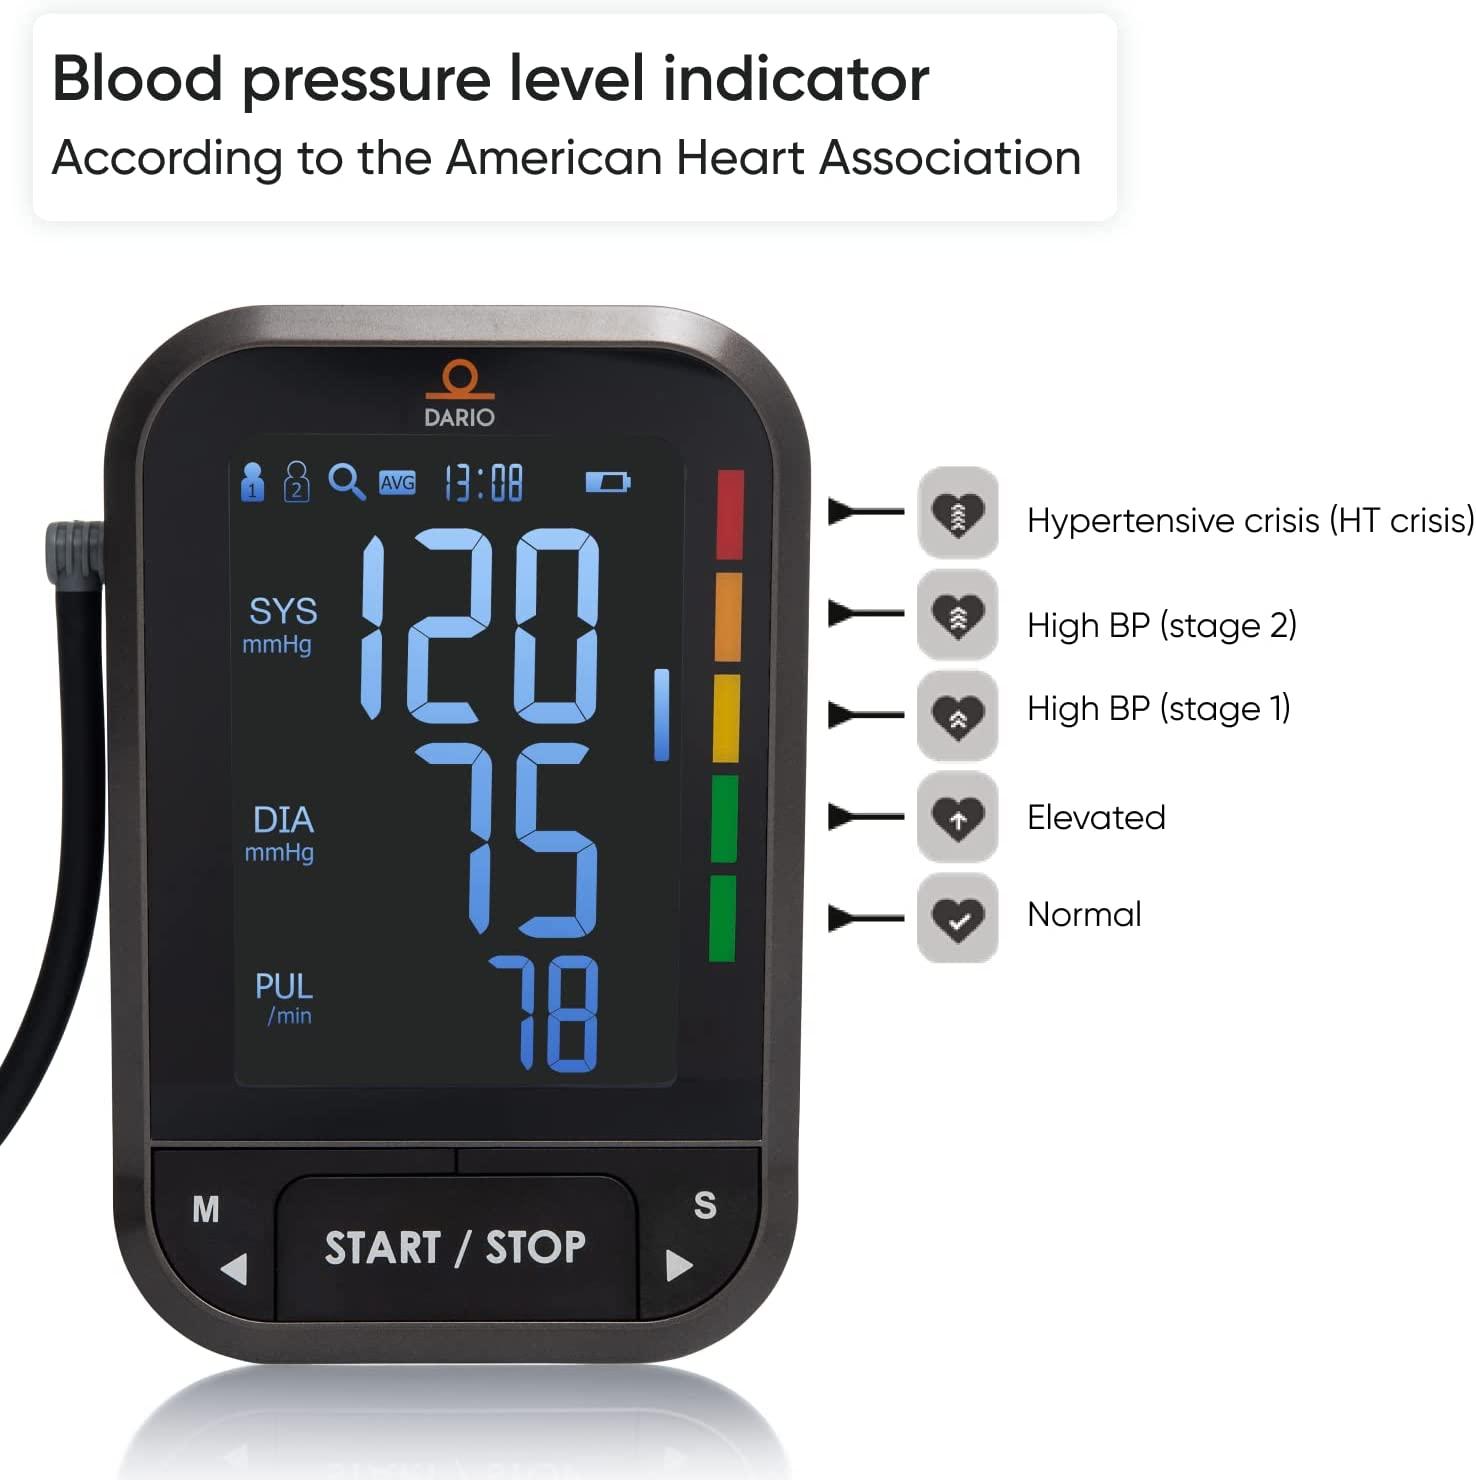  Dario Blood Pressure Monitor For Home Use Gen2 Automatic  Machine, LCD Backlit Display, Large Adjustable Arm Cuff